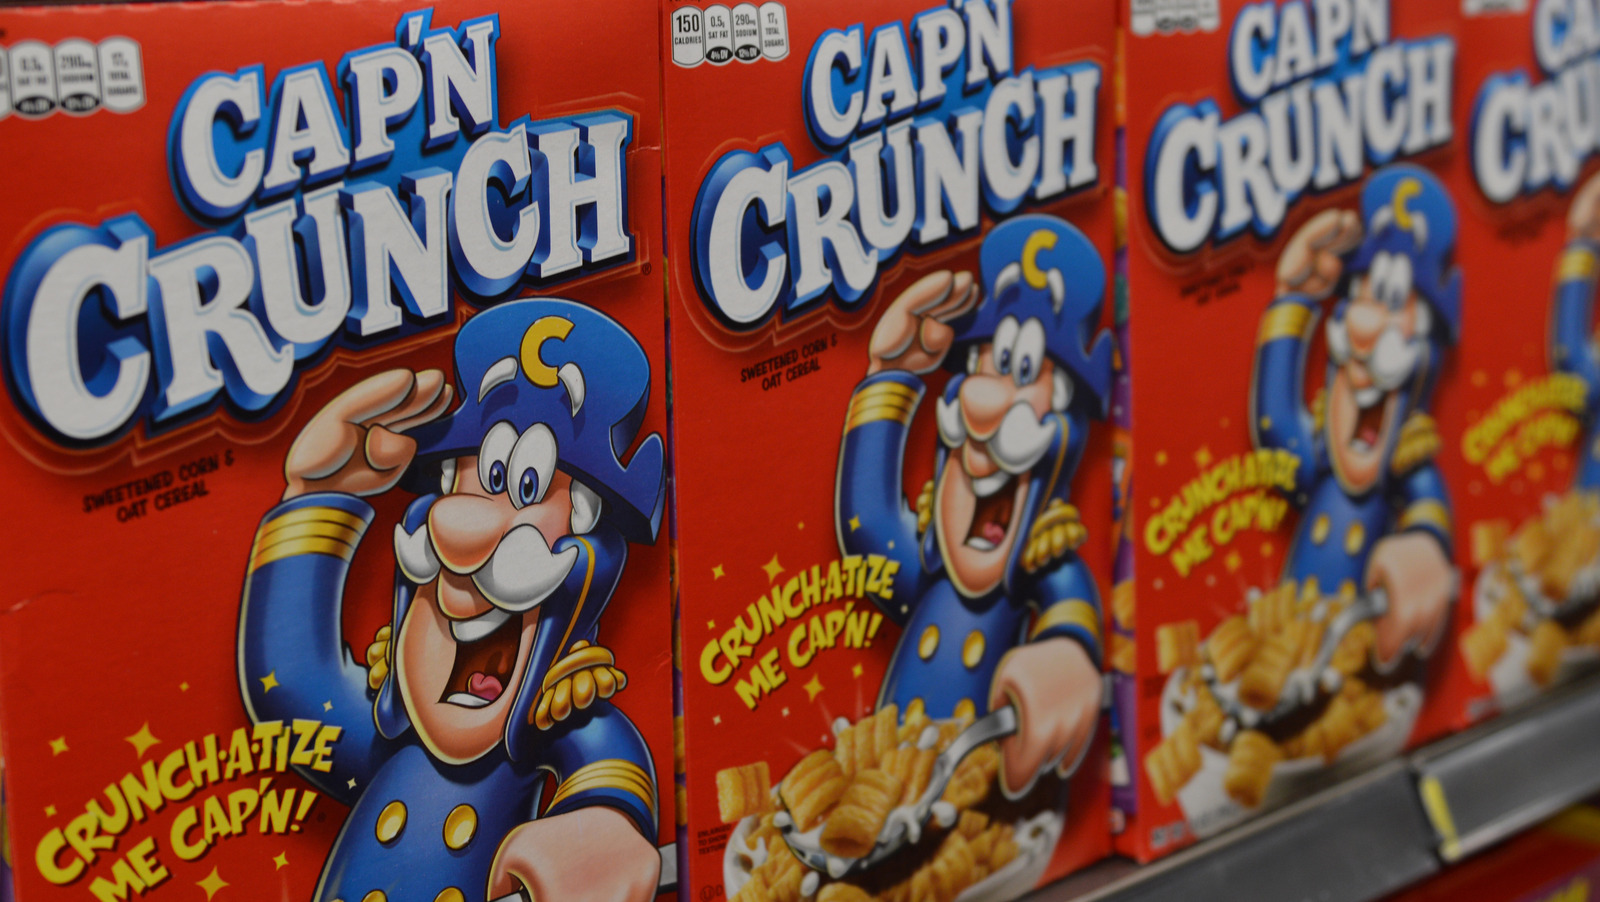 captain crunch real name